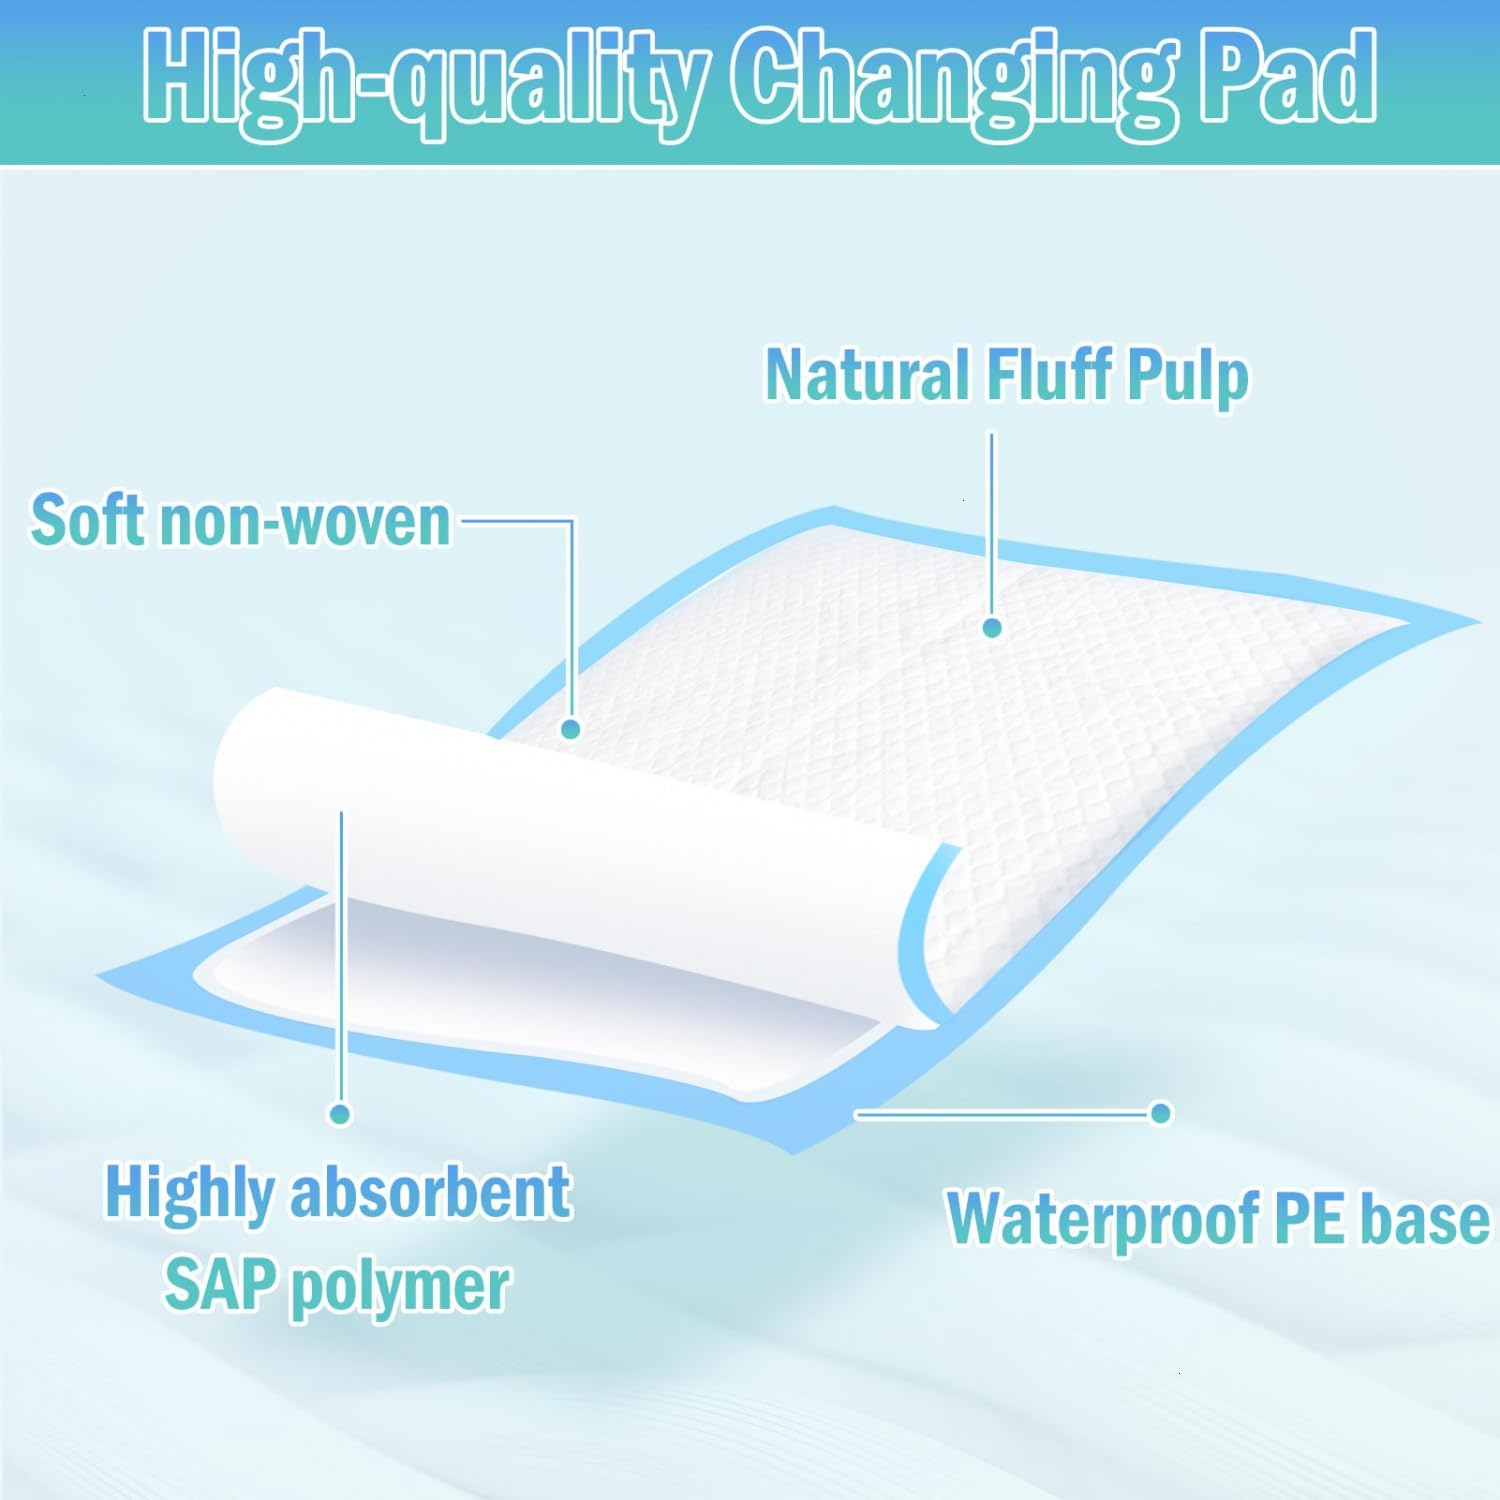 Rocinha 100 Pack Disposable Changing Pads Baby Disposable Underpads Waterproof Diaper Changing Pad Breathable Underpads Bed Table Protector Mat, 17 Inches x 13 Inches